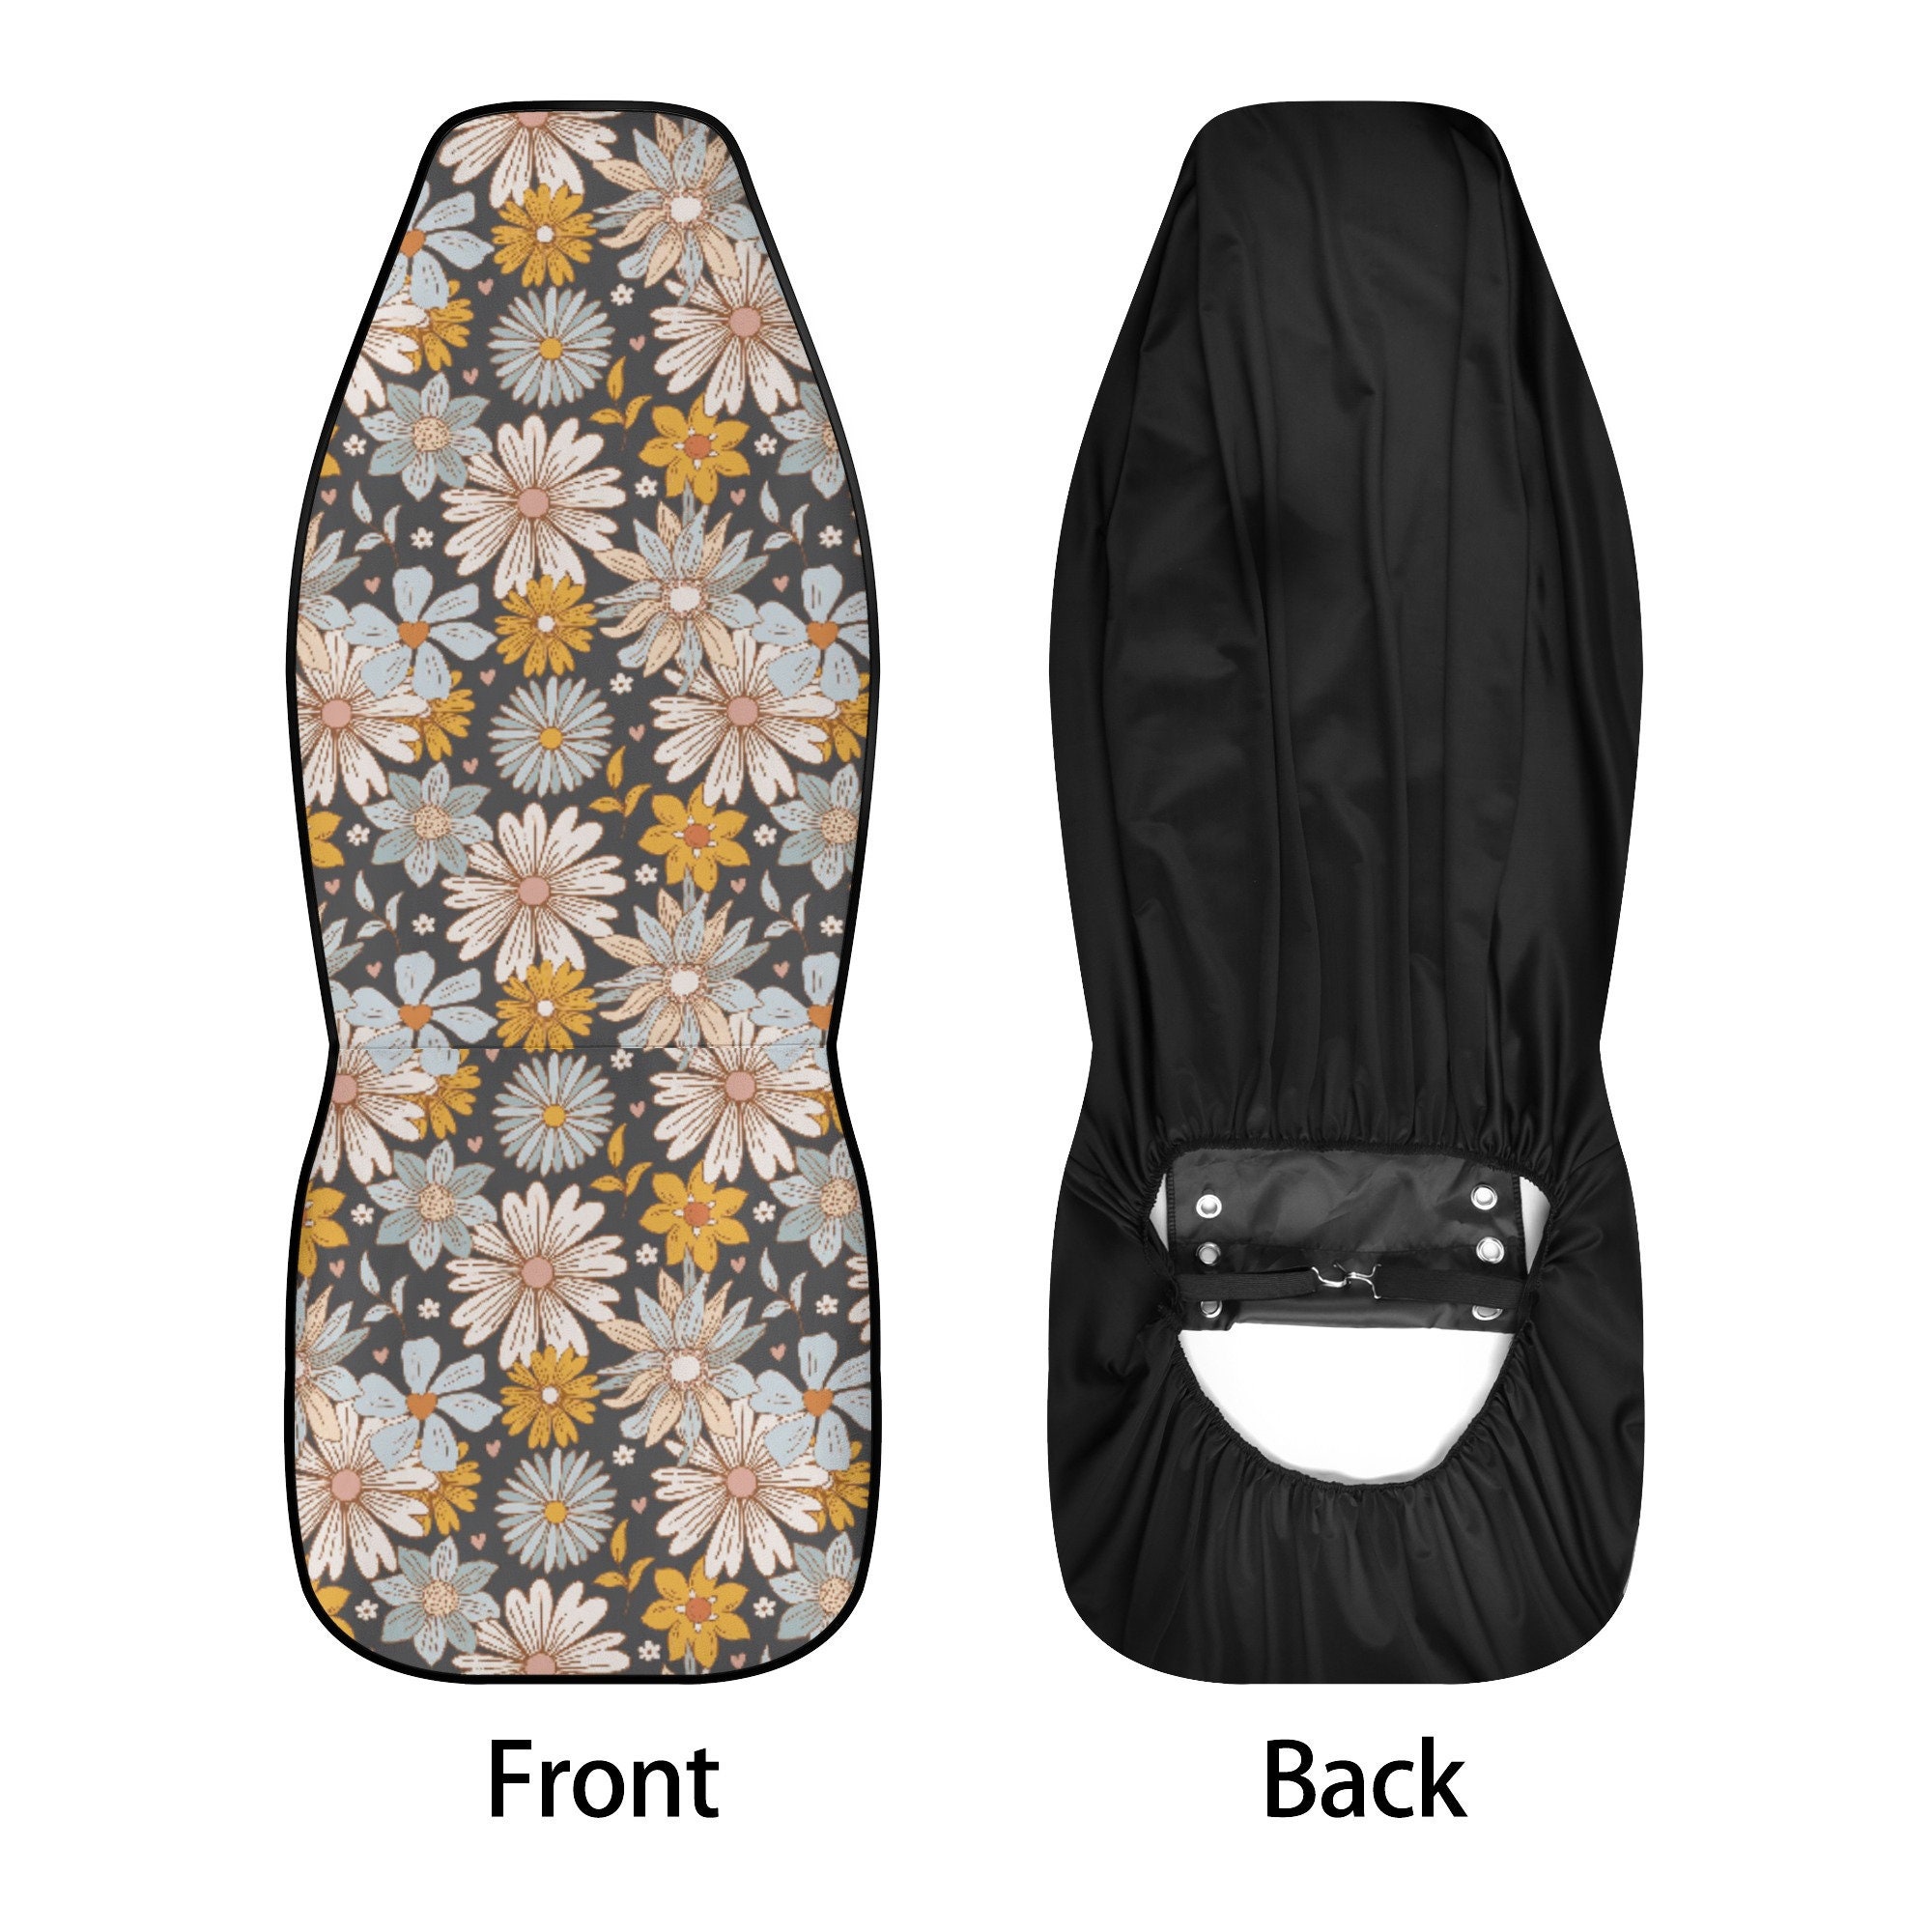 Floral Daisy Blue Car Seat Cover, Summer Flower Car Seat Covers